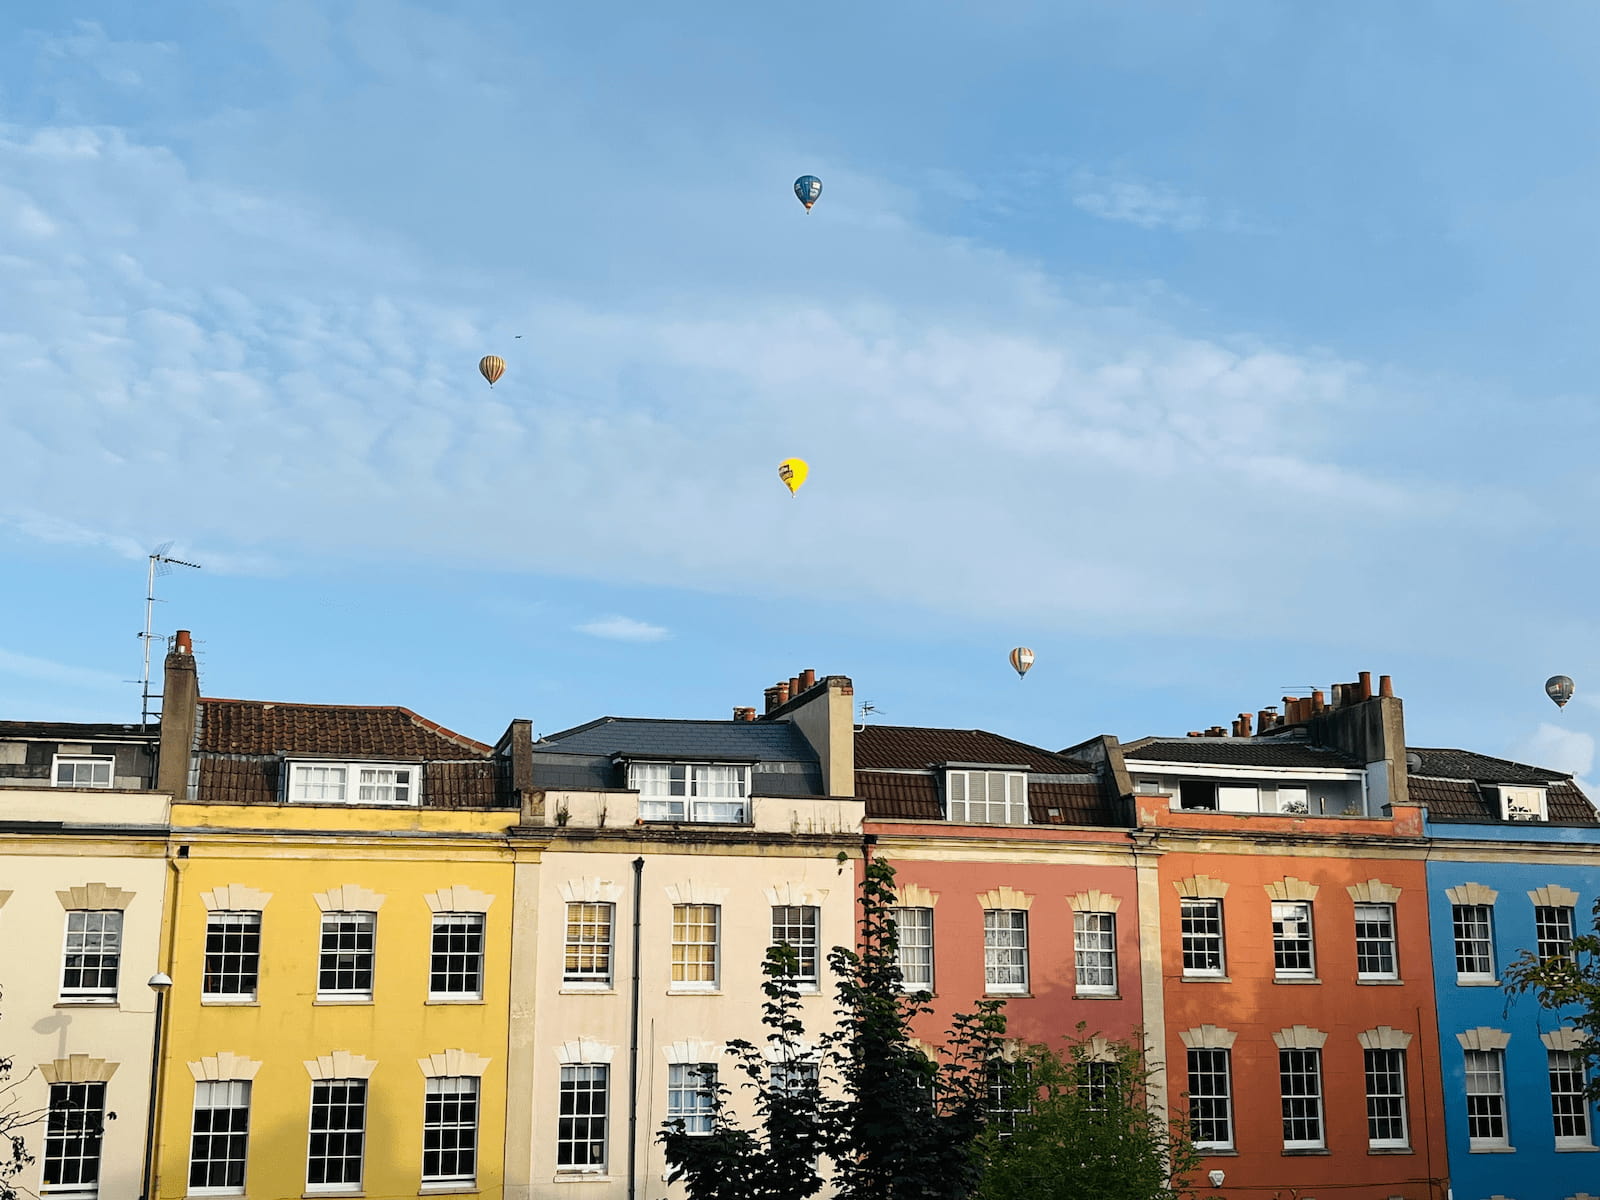 houses in various bright colors like yellow, blue and red, with a blue sky that contains 5 hot air balloons